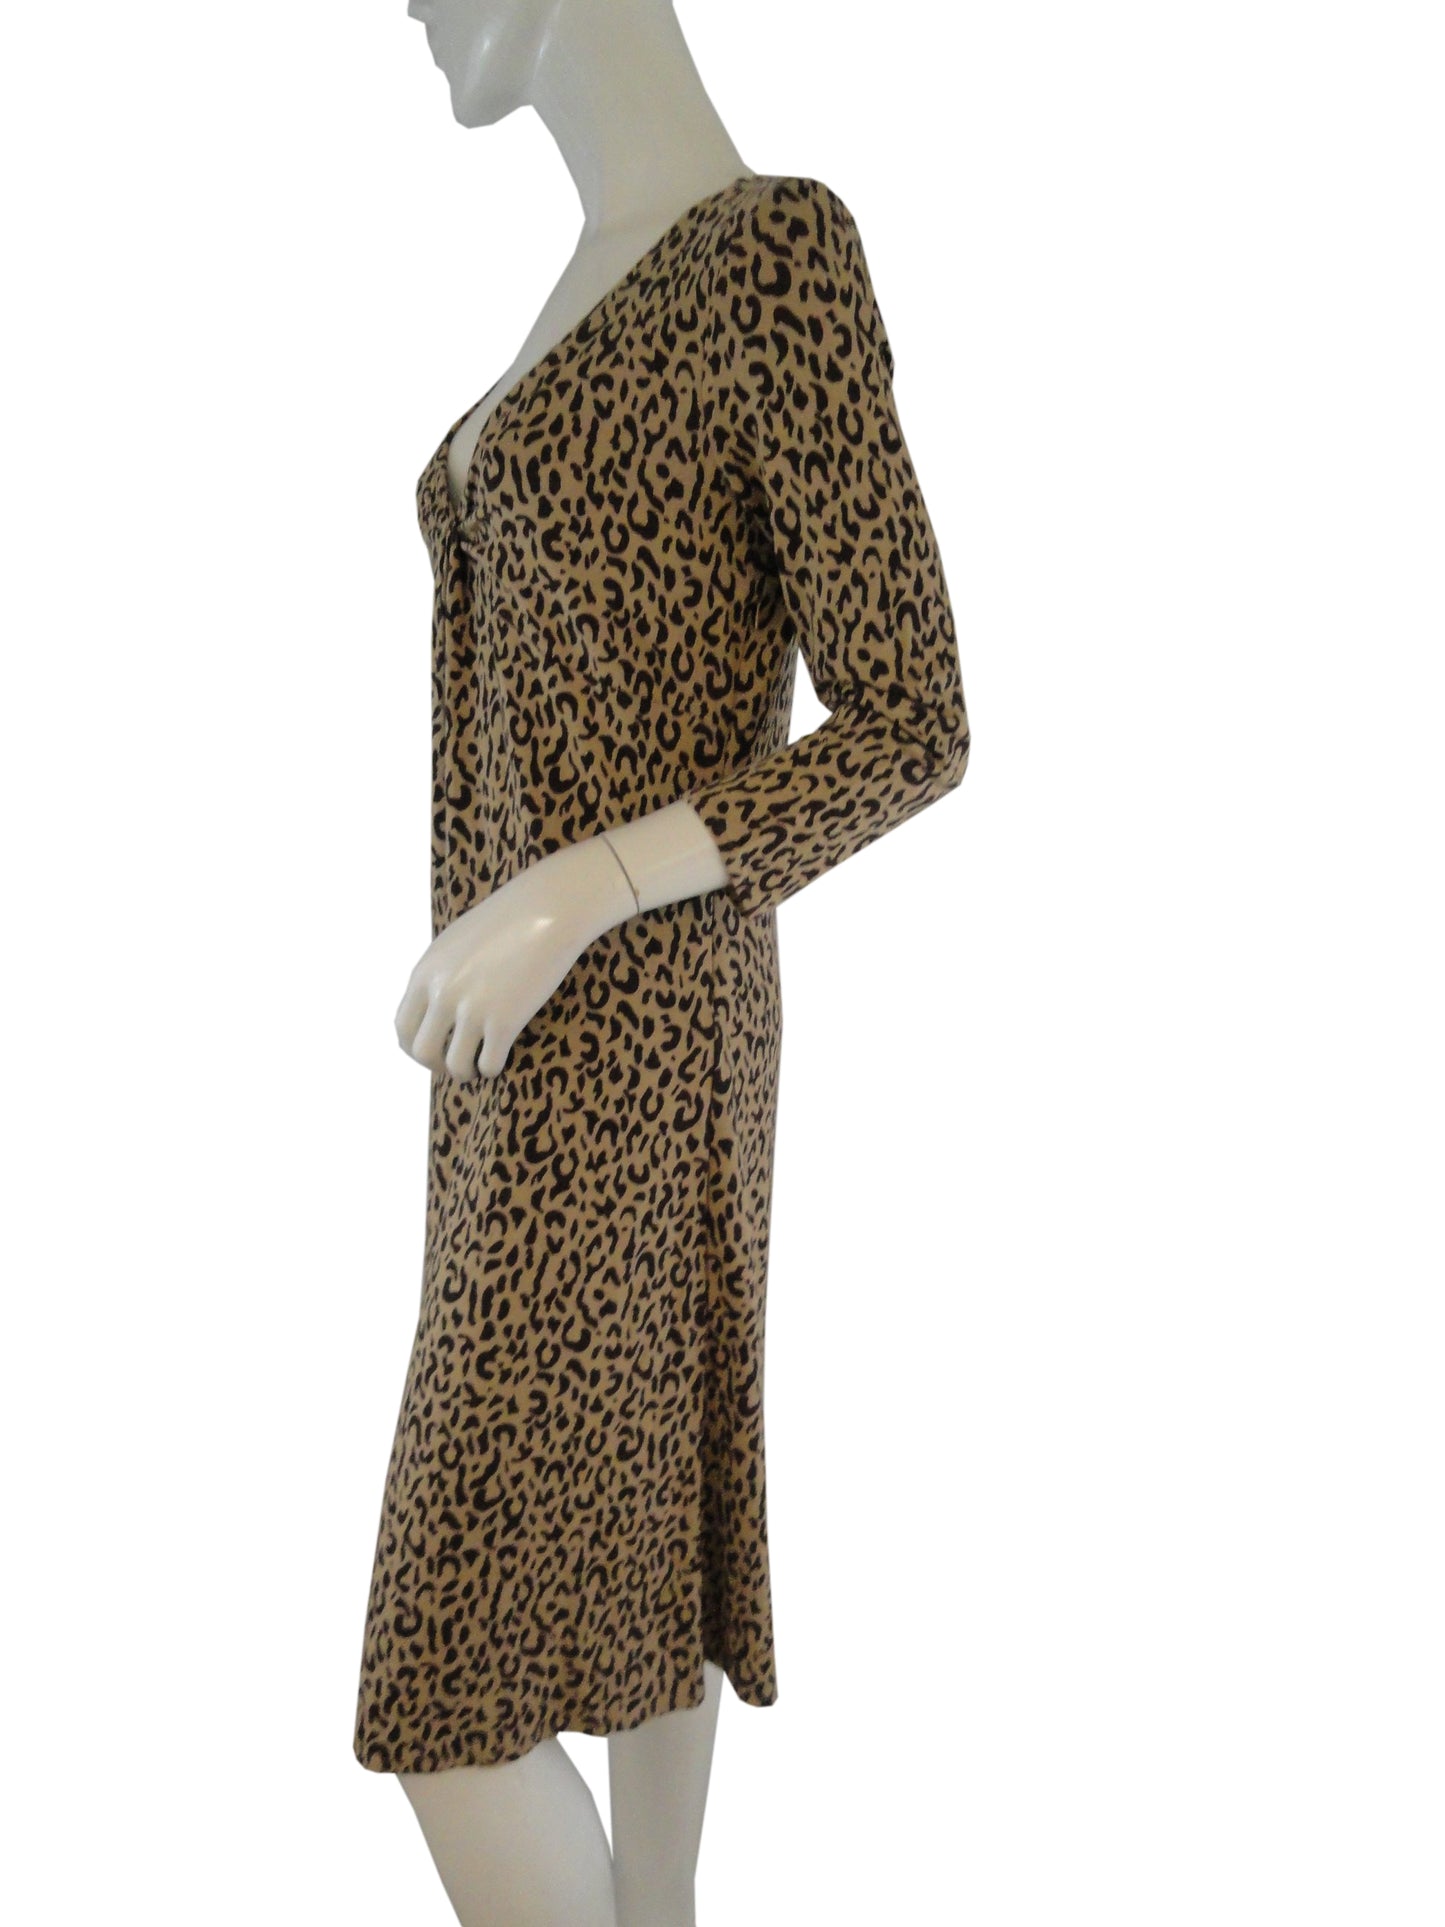 Load image into Gallery viewer, Ann Taylor Loft light brown with dark brown design Dress Size 10 SKU 000125
